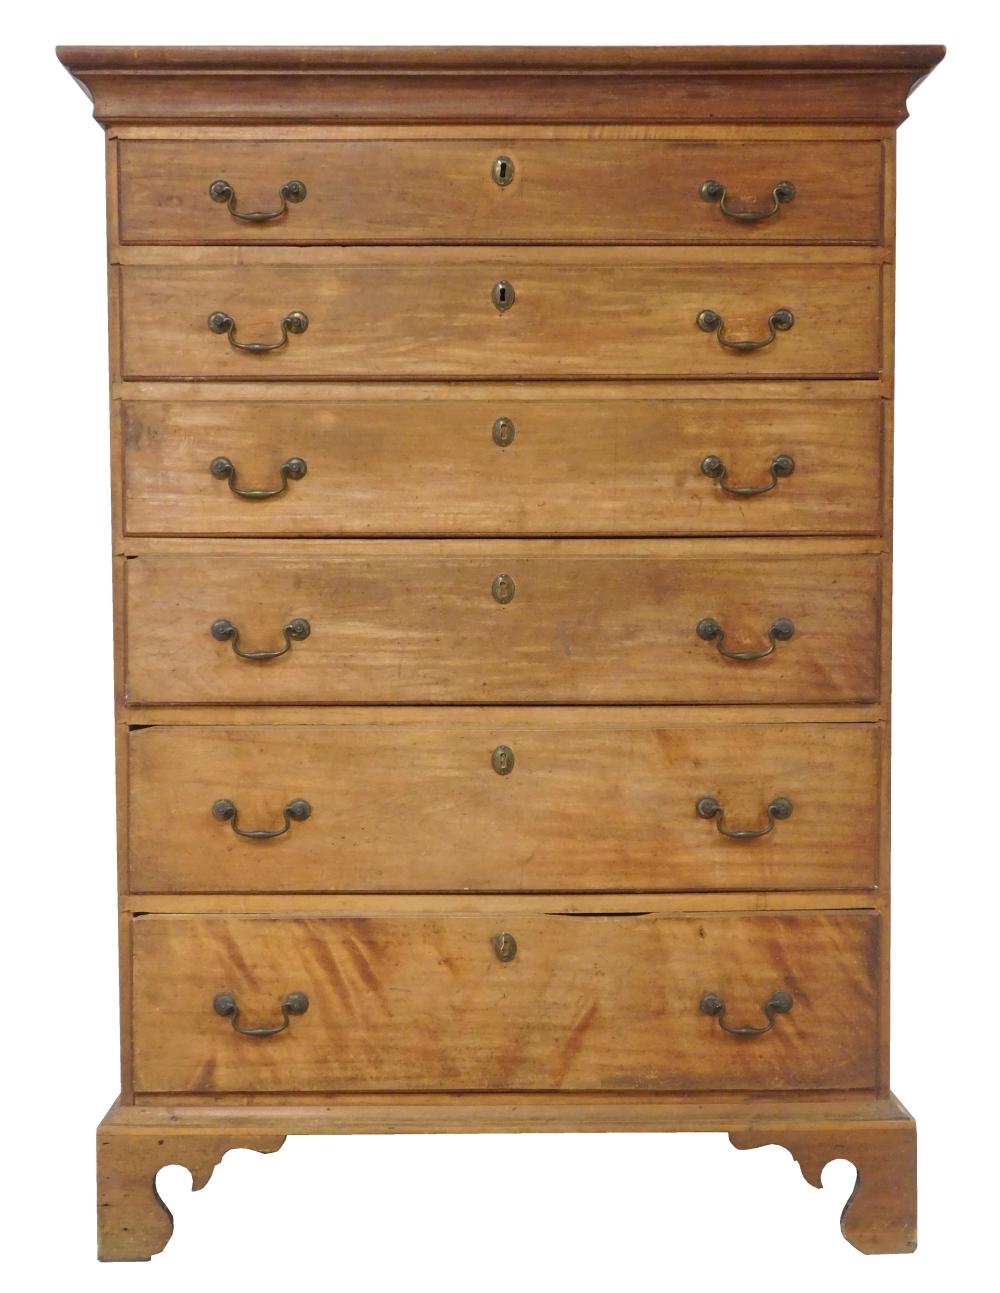 TALL CHEST OF DRAWERS, LATE 18TH C.,